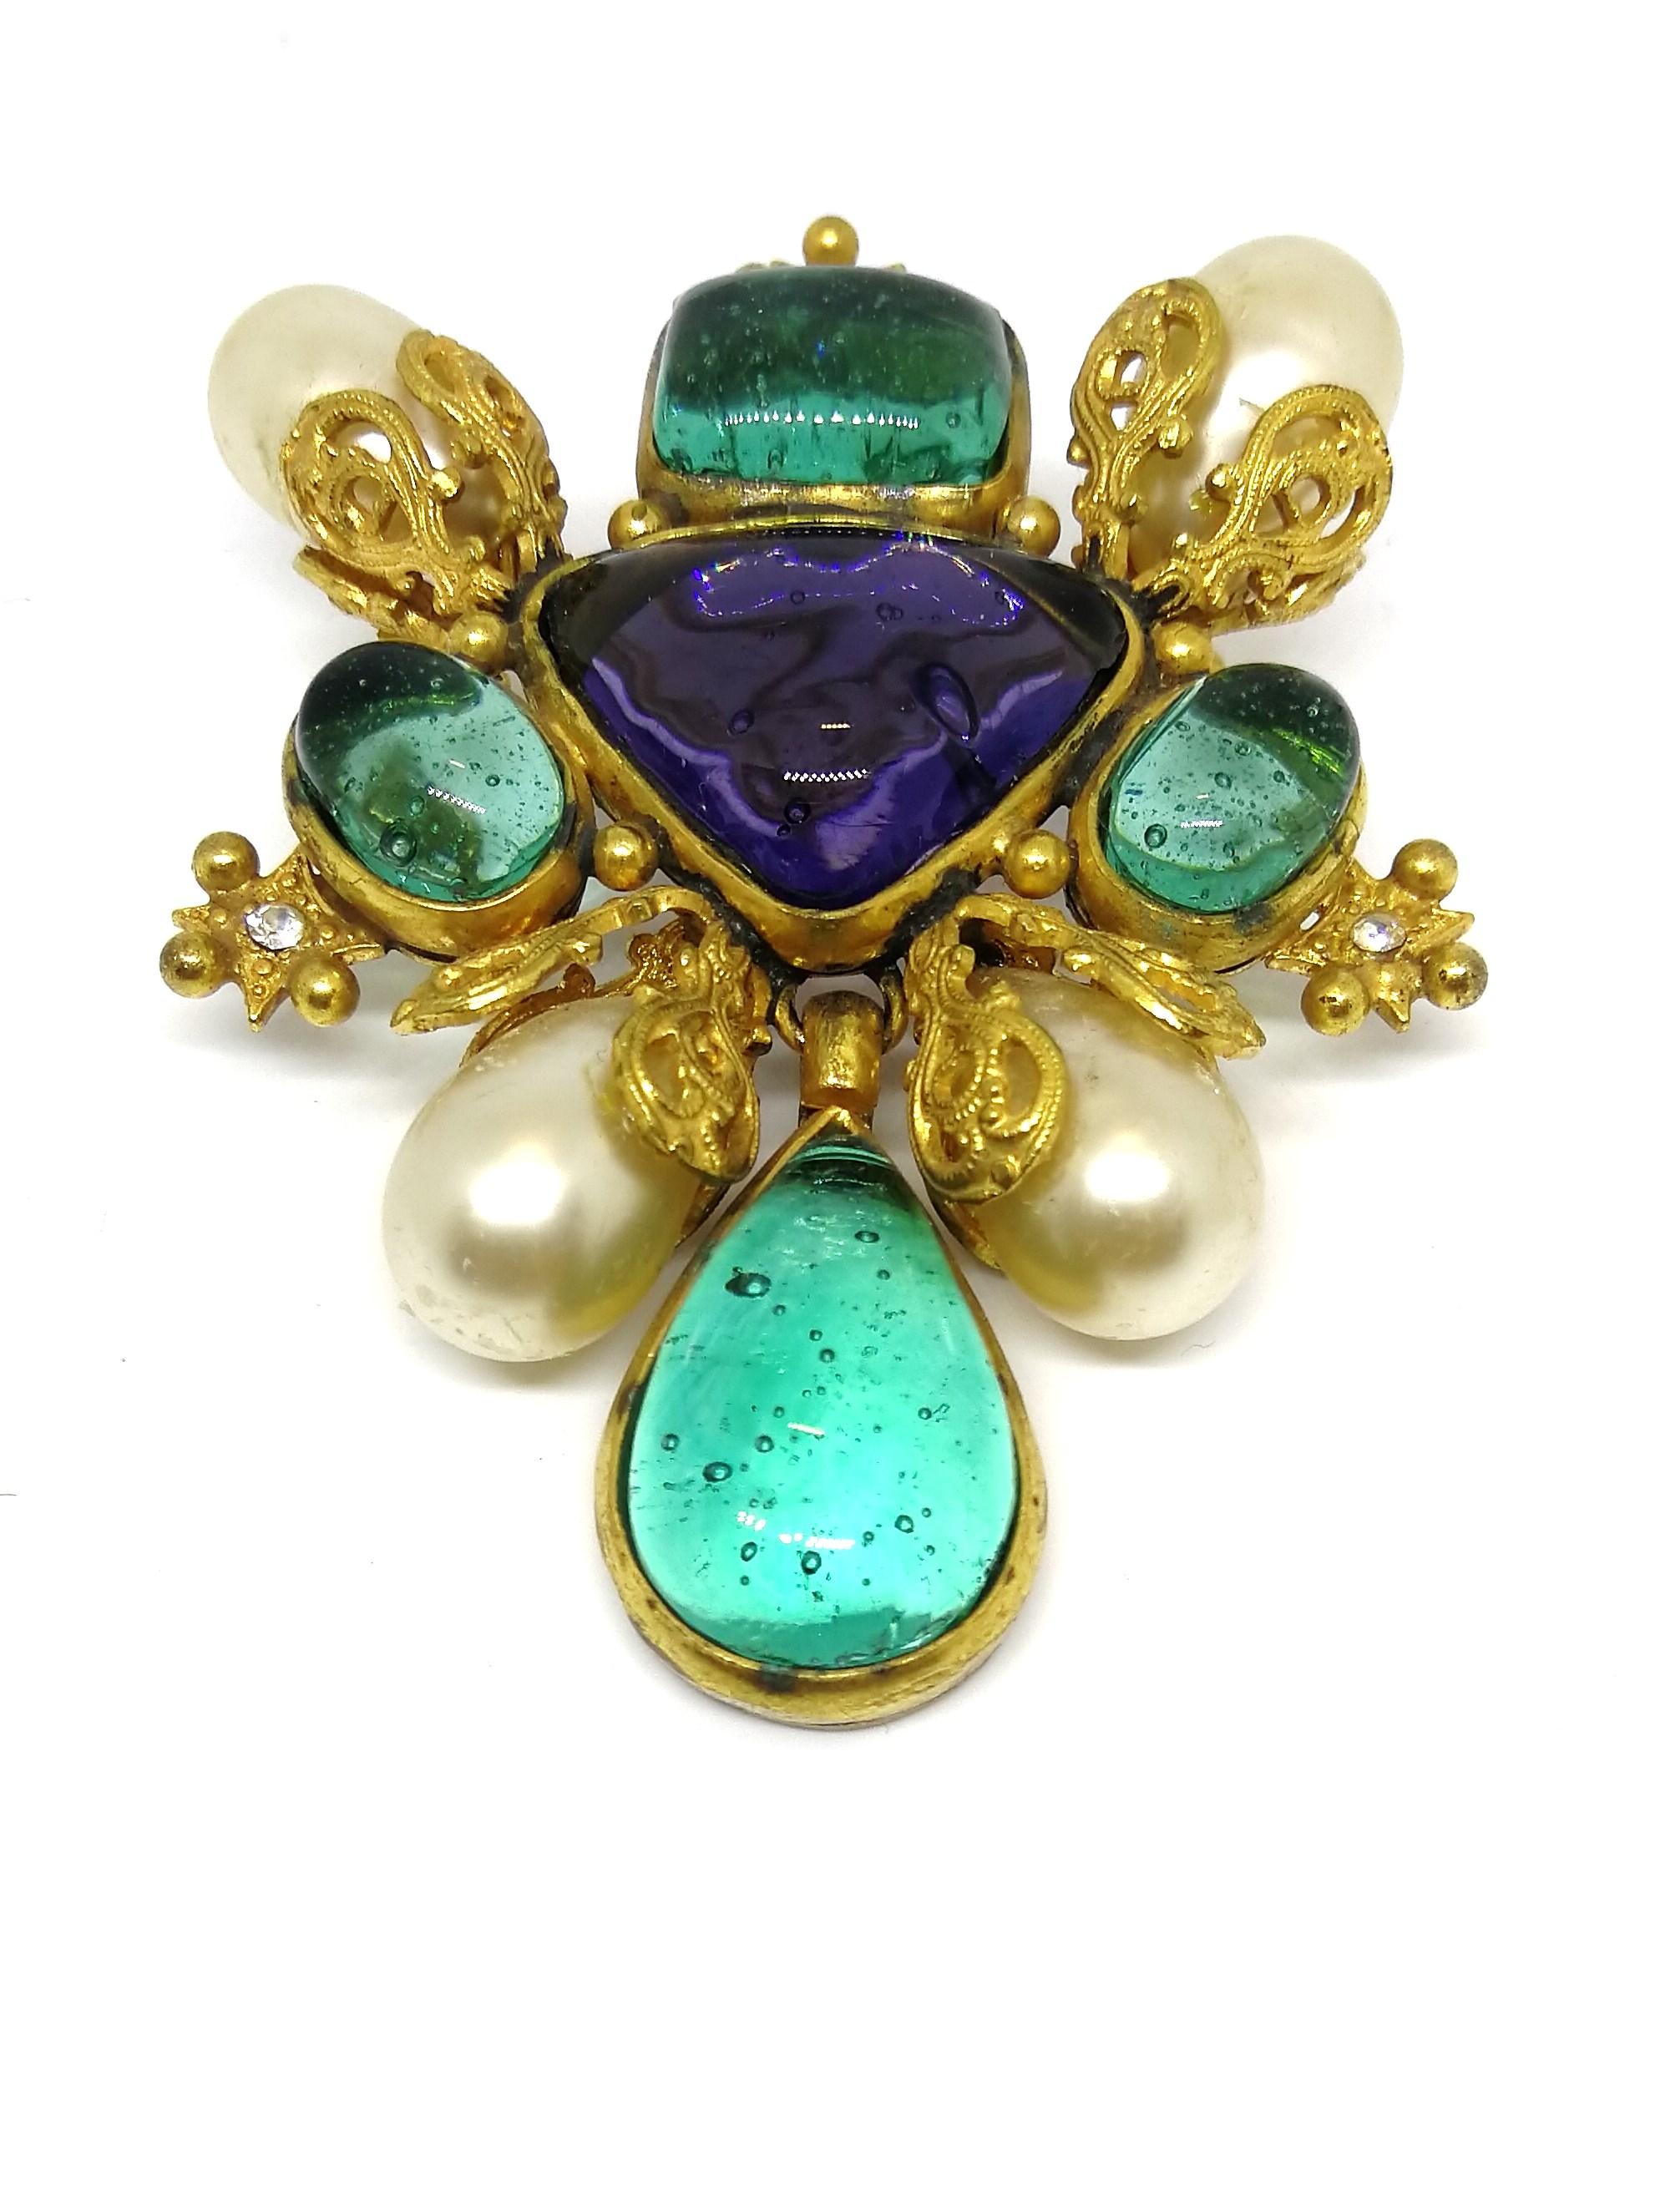 Baroque A large poured glass 'cruxiform' brooch, Robert Goossens for Chanel, 1990